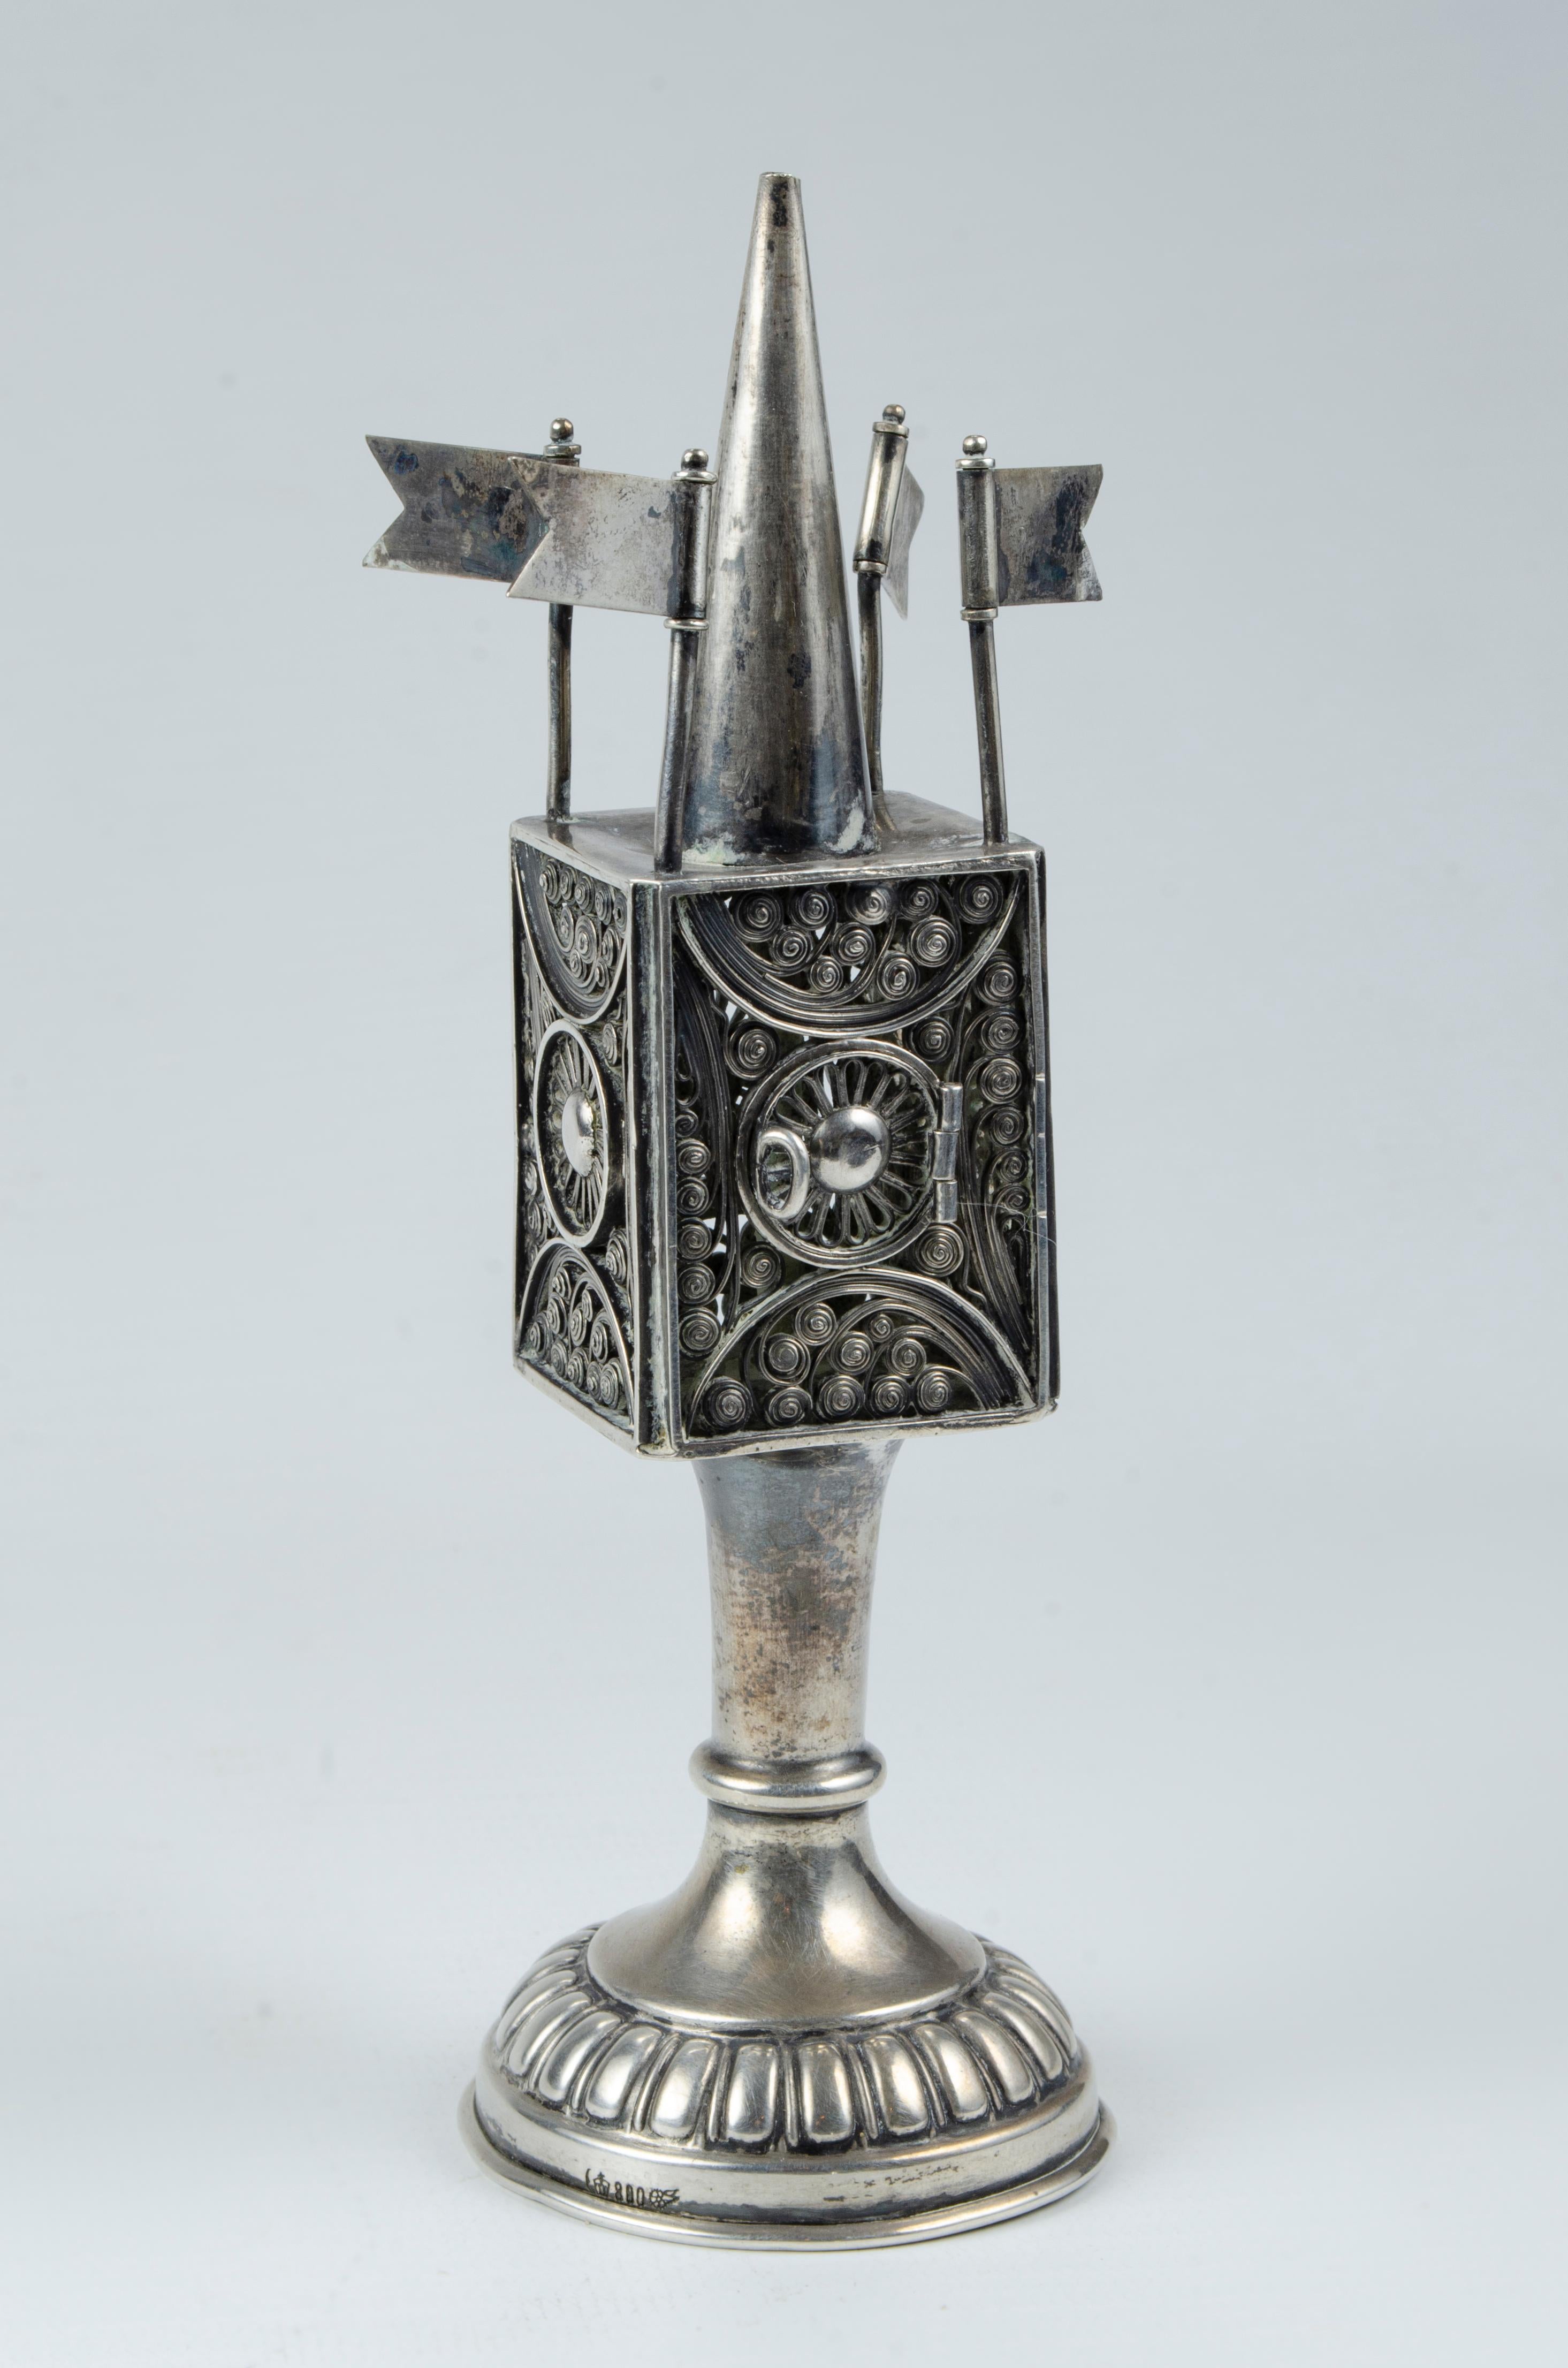 Jewish ritual objet
Besamin TOTEM
Silver spice tower
Origin Germany Circa 1900
at its base it has the silver seals
Possibly a flag missing
95 g of weight.